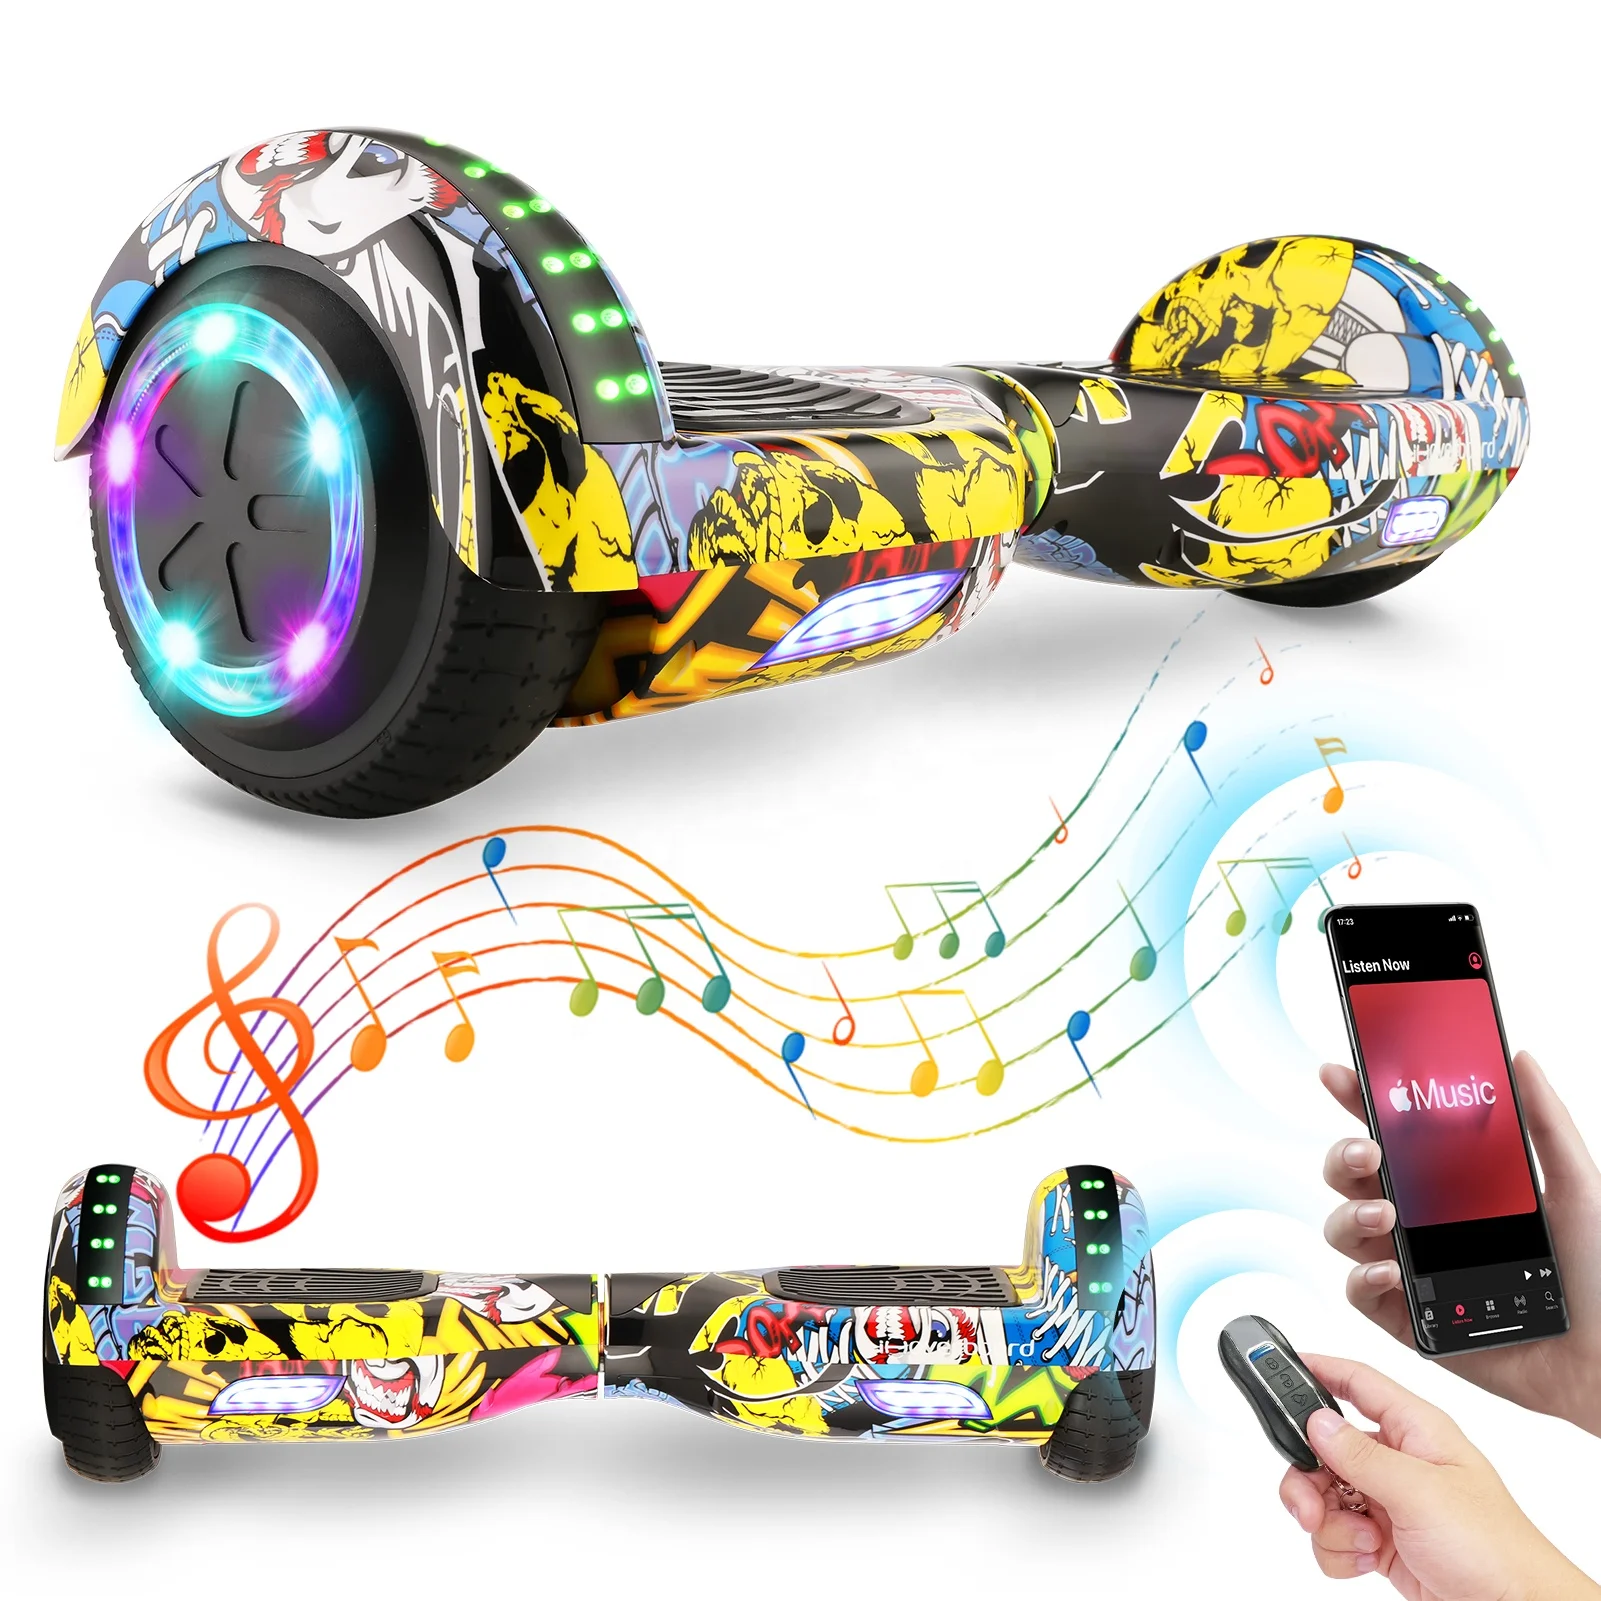 

EU UK USA Warehouse 6.5 Inch 350W*2 Off Road 15km/h Smart Bluetooth Light Two Wheel Self-Balancing Electric Scooters Hoverboard, Multiple